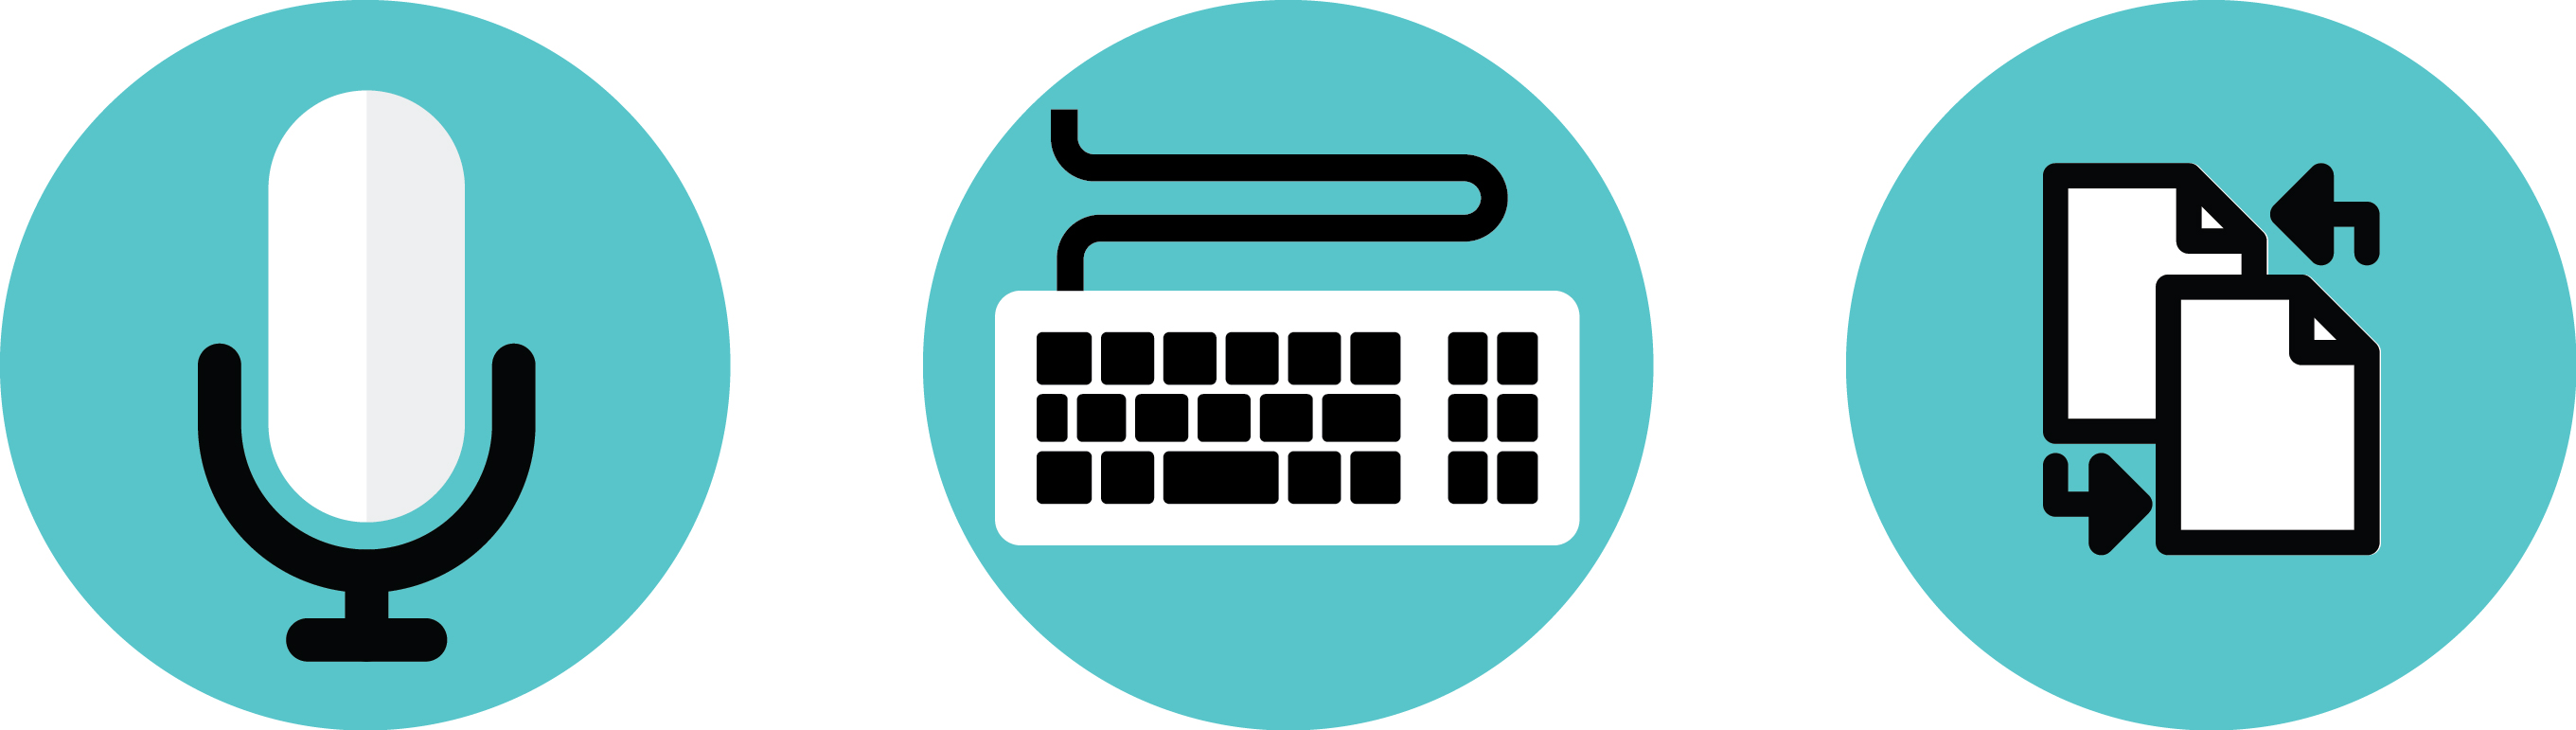 Graphic icon for interview process with microphone, keyboard, documents